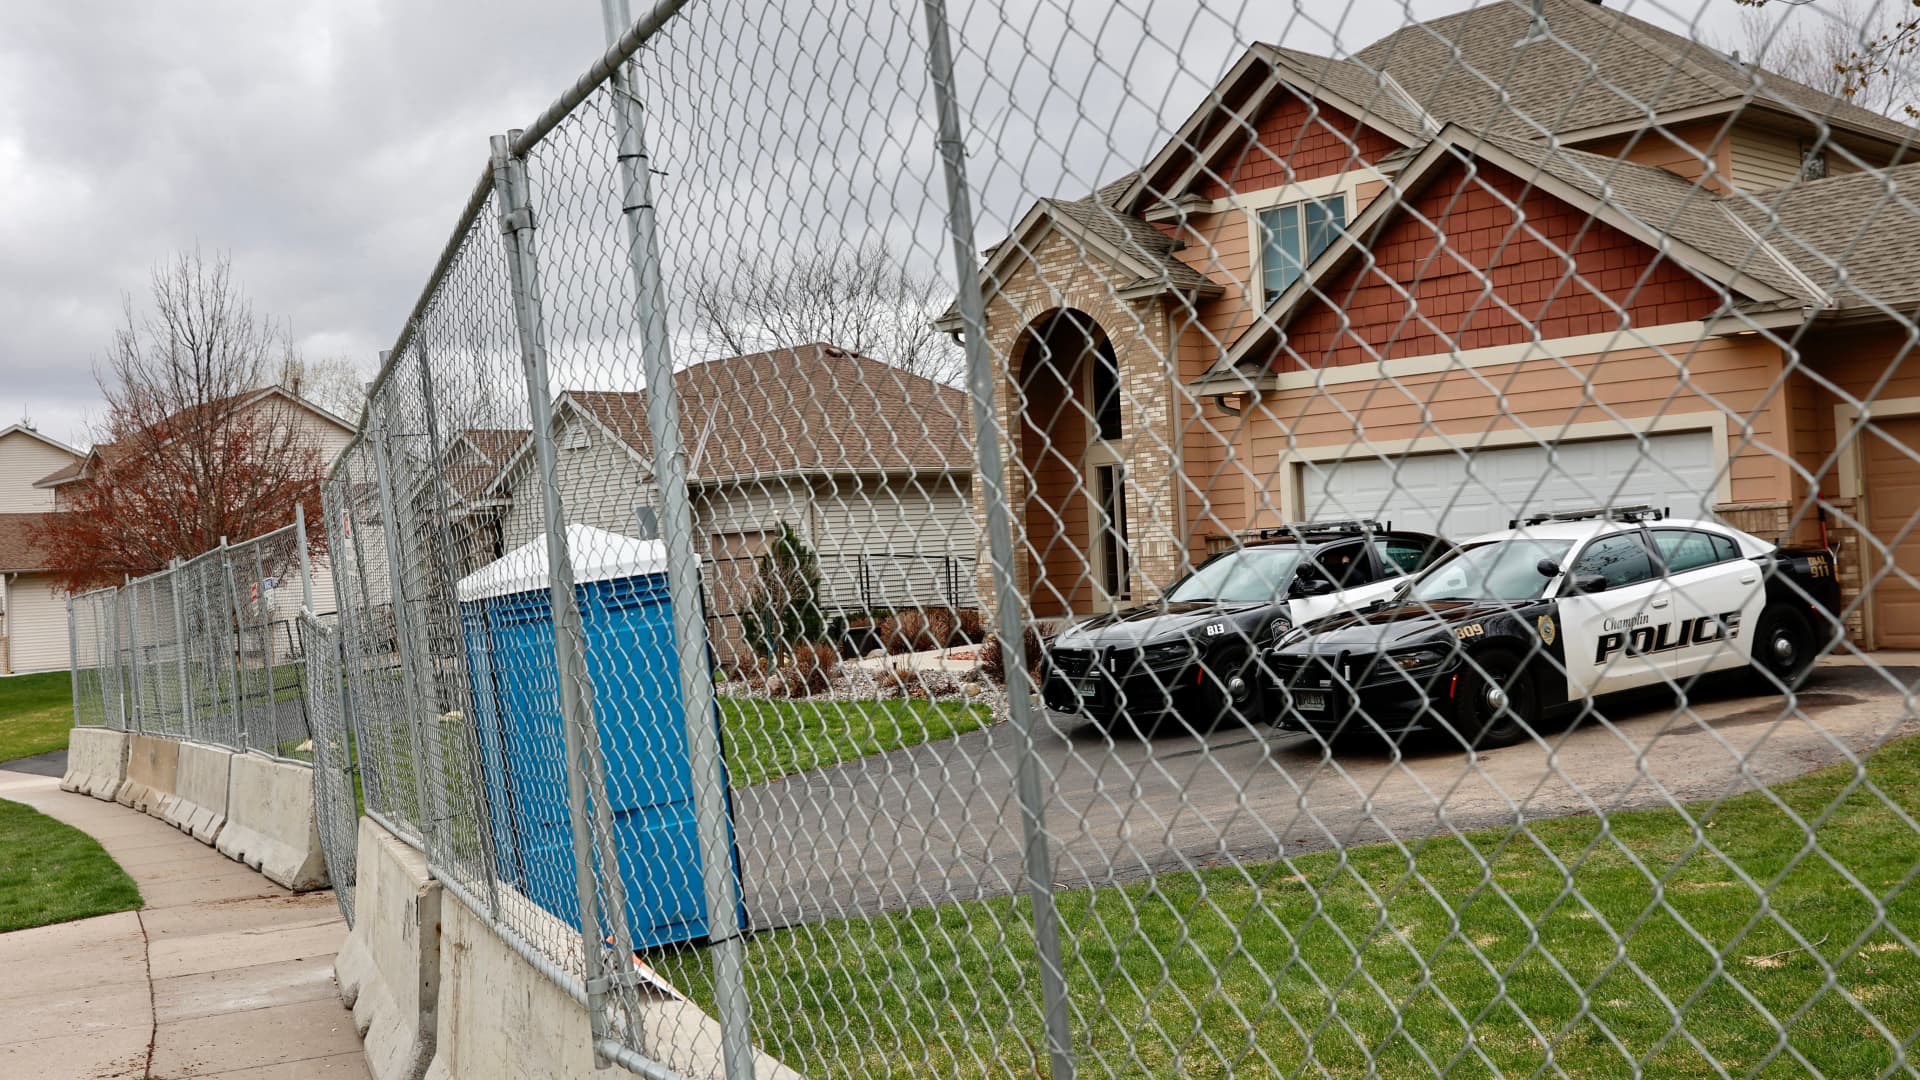 Ex-Police officer Kim Potter's house is blocked by security barricades in Champlin, Minnesota on April 14, 2021.